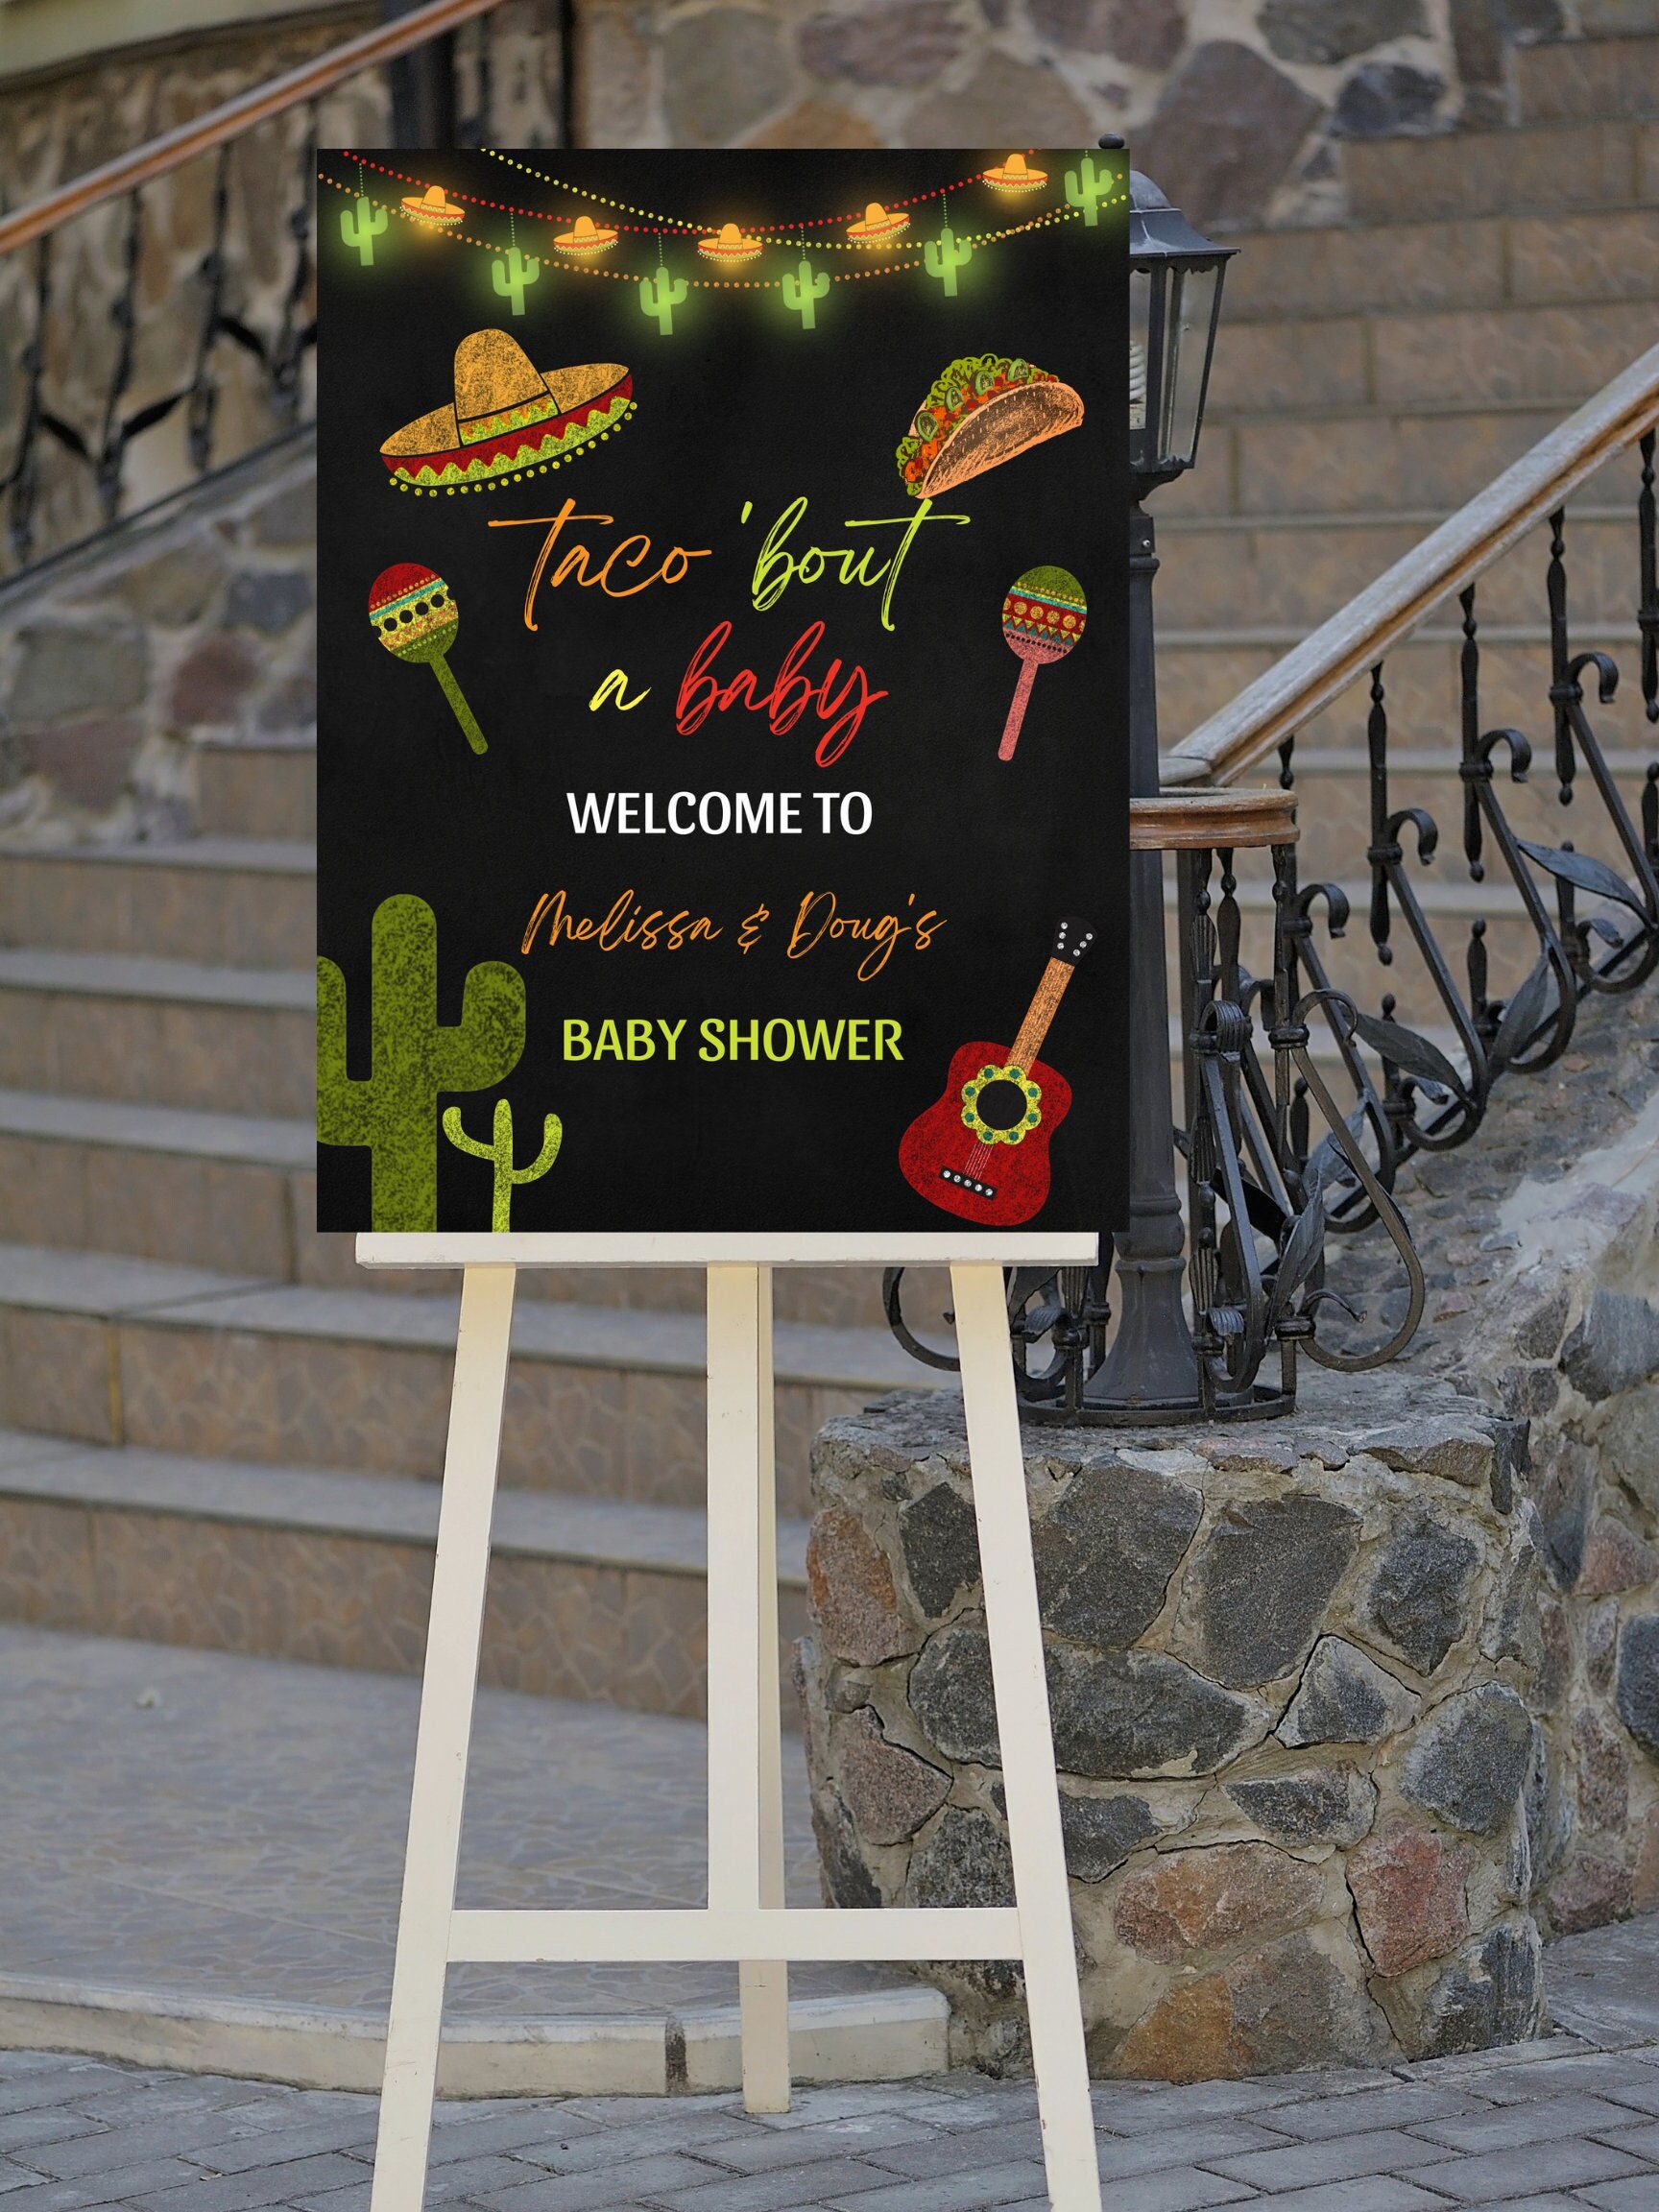 Fiesta Welcome Party Sign, Fiesta Party Decorations, Mexican Party Sign,  Taco Bout A Party, Welcome Amigos 